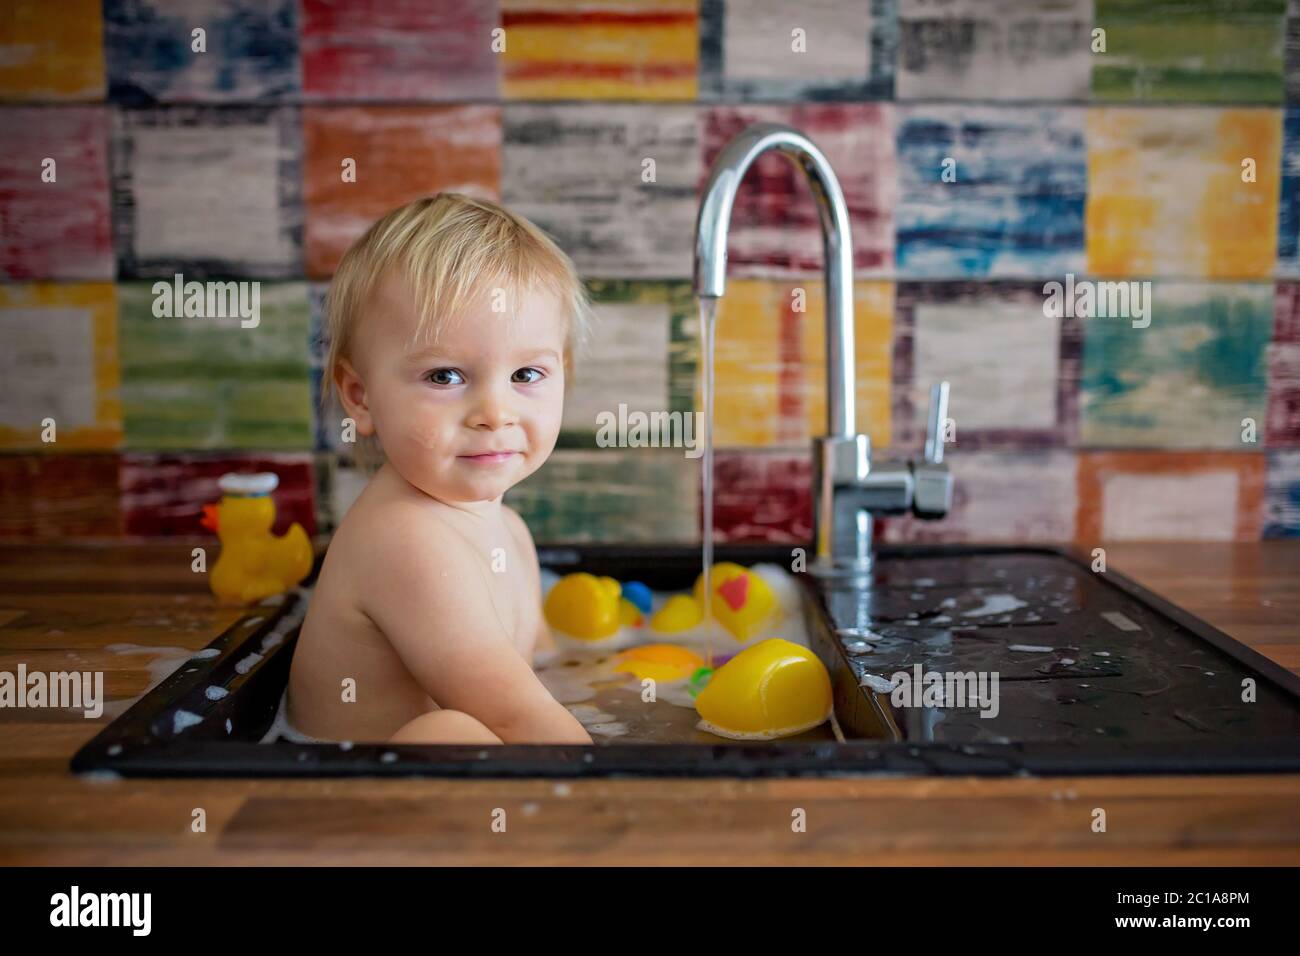 Cute Smiling Baby Taking Bath In Kitchen Sink Child Playing With Foam And Soap Bubbles In Sunny Kitchen With Rubber Ducks And Toys Little Boy Bathin Stock Photo Alamy